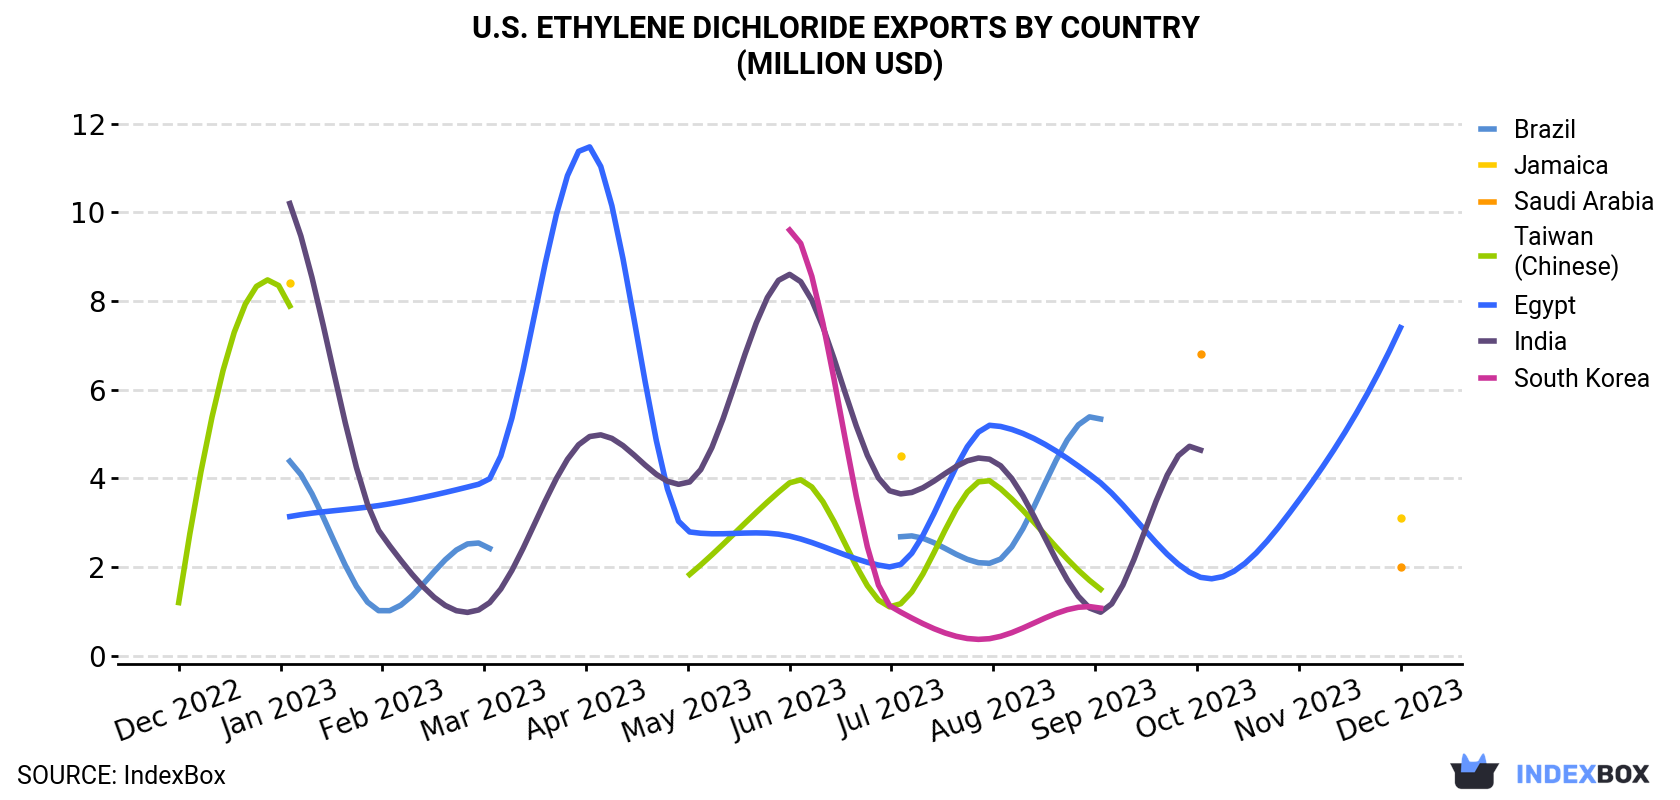 U.S. Ethylene Dichloride Exports By Country (Million USD)